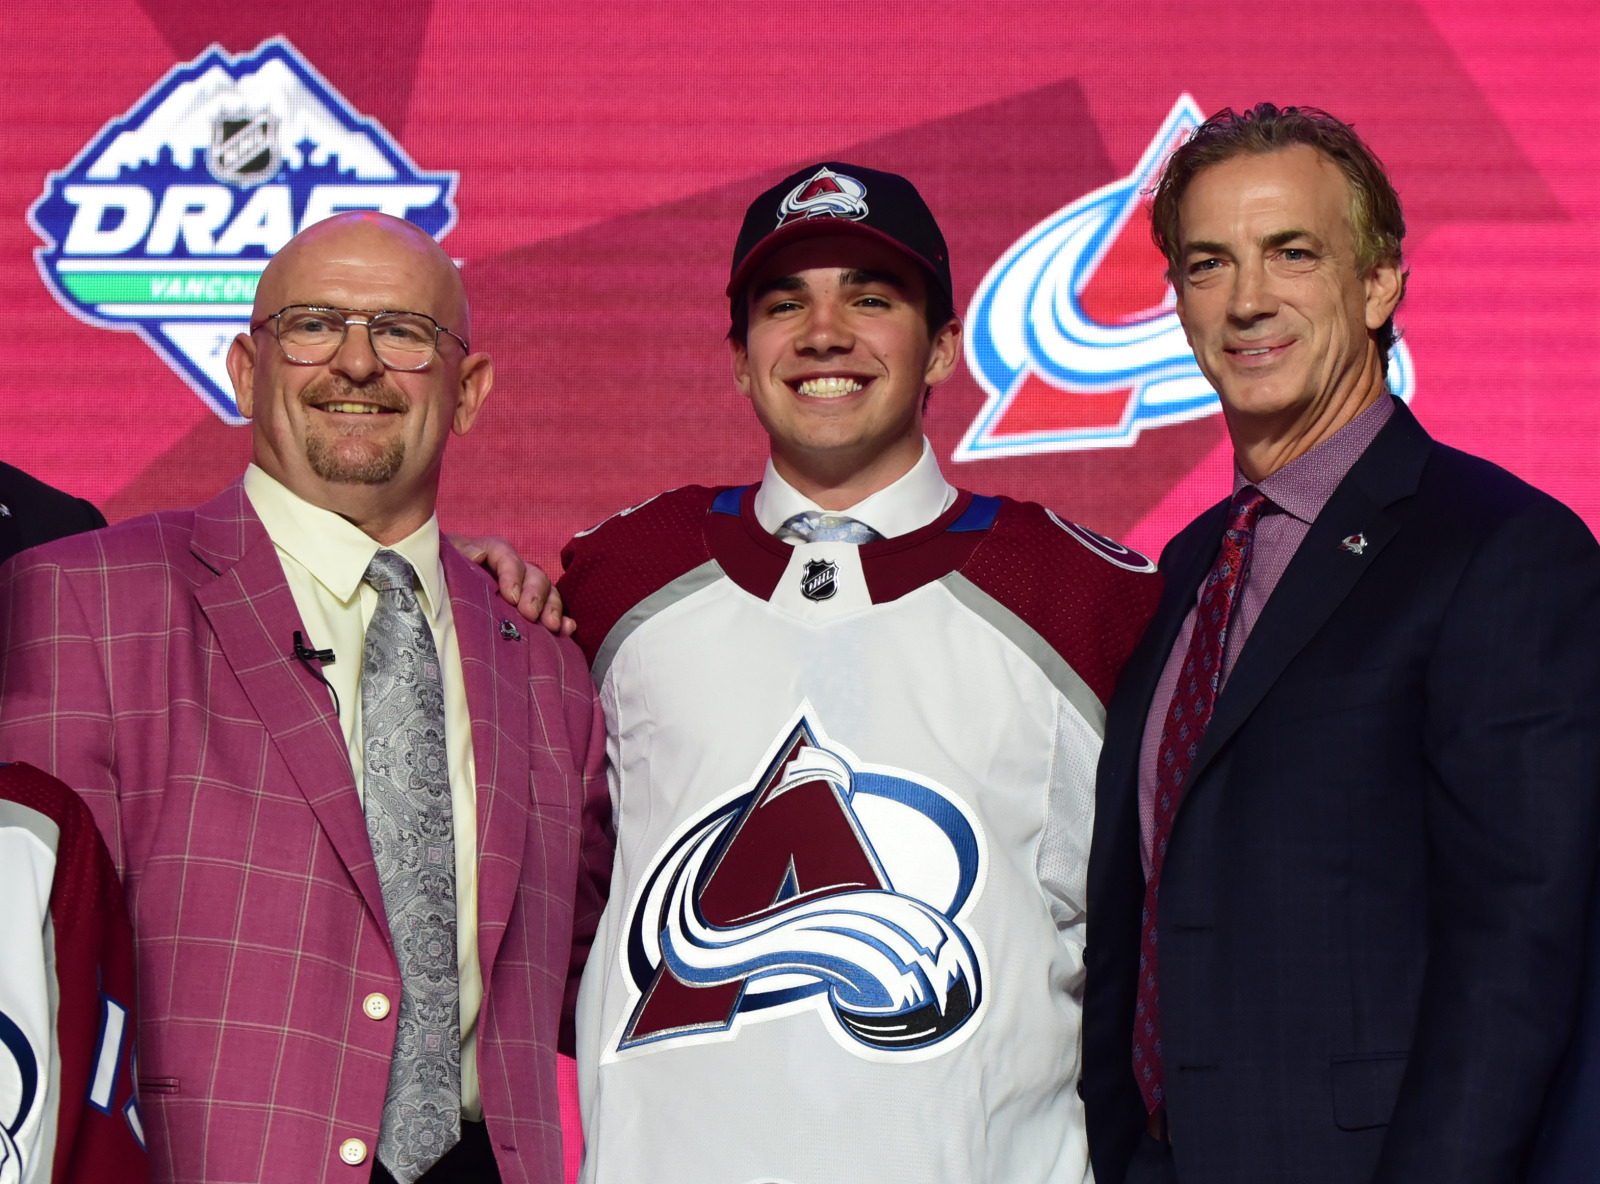 NHL Draft picks 2022: Complete results, list of selections from Rounds 1-7